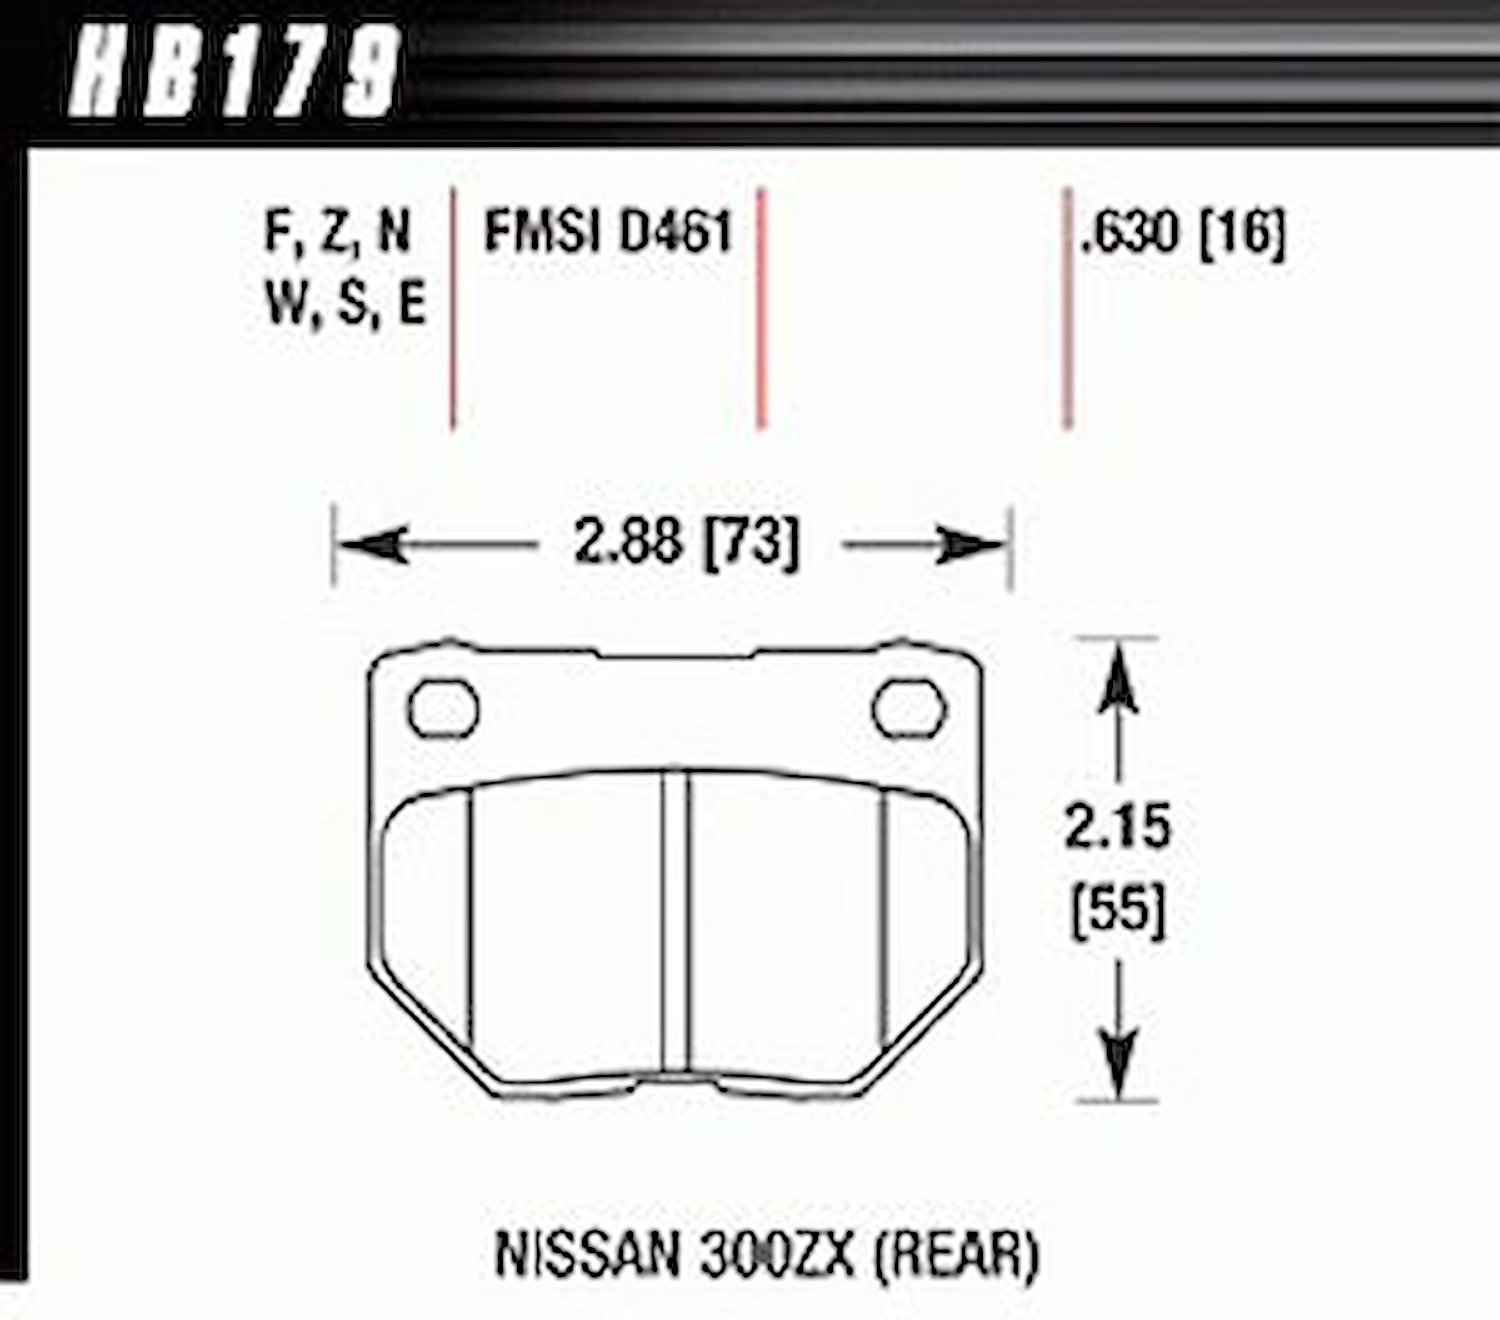 HT-10 PADS For for Nissan 300ZX Rear